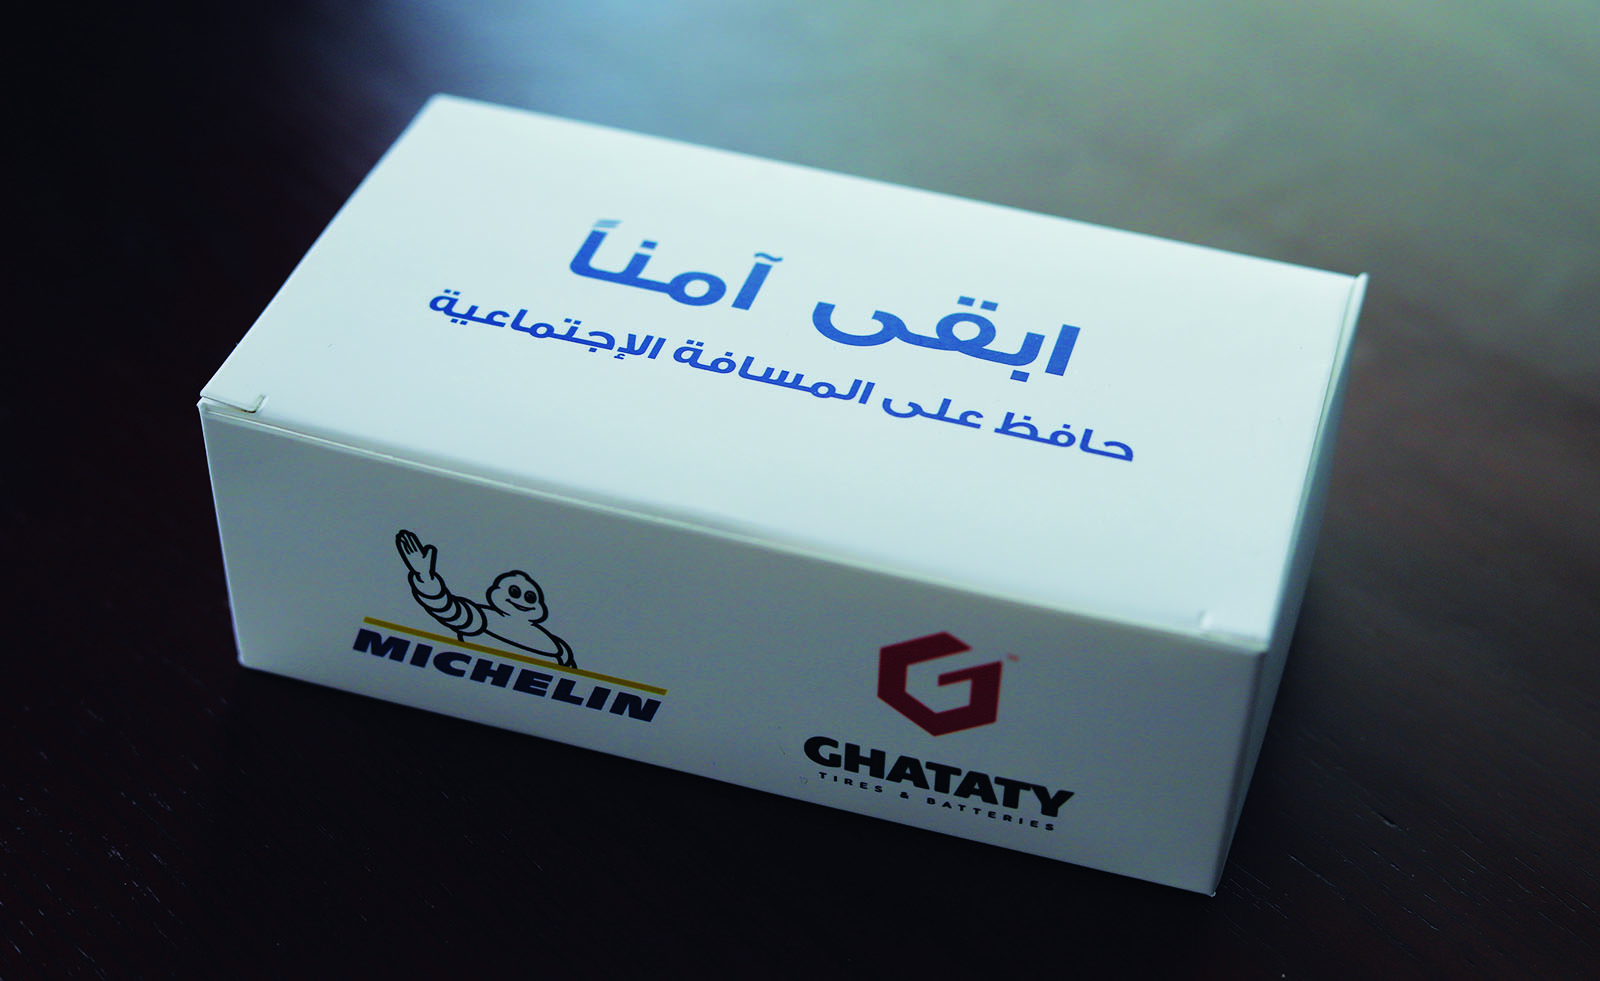 Ghataty and Michelin Launch a Campaign to Raise Awareness Against COVID-19 in Egypt